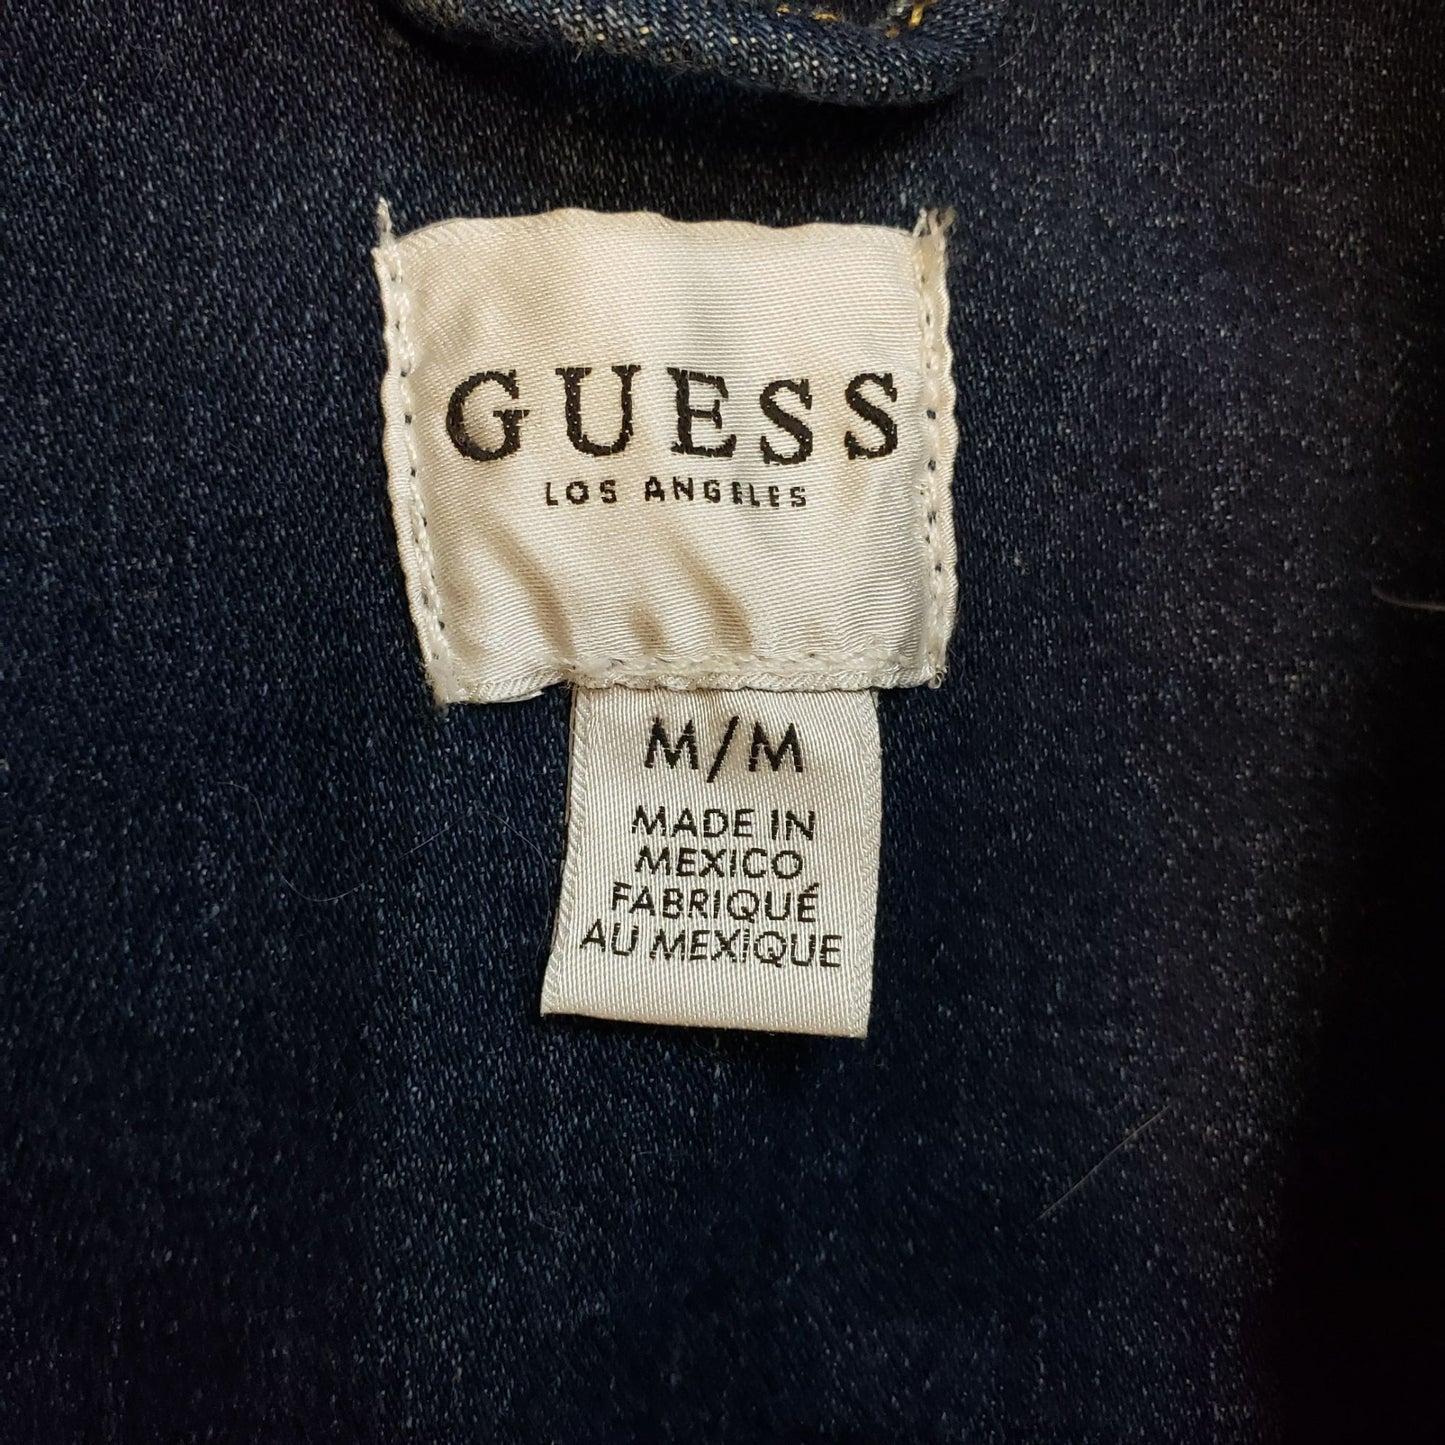 Guess Button Front Cropped Denim Jacket Size S/M